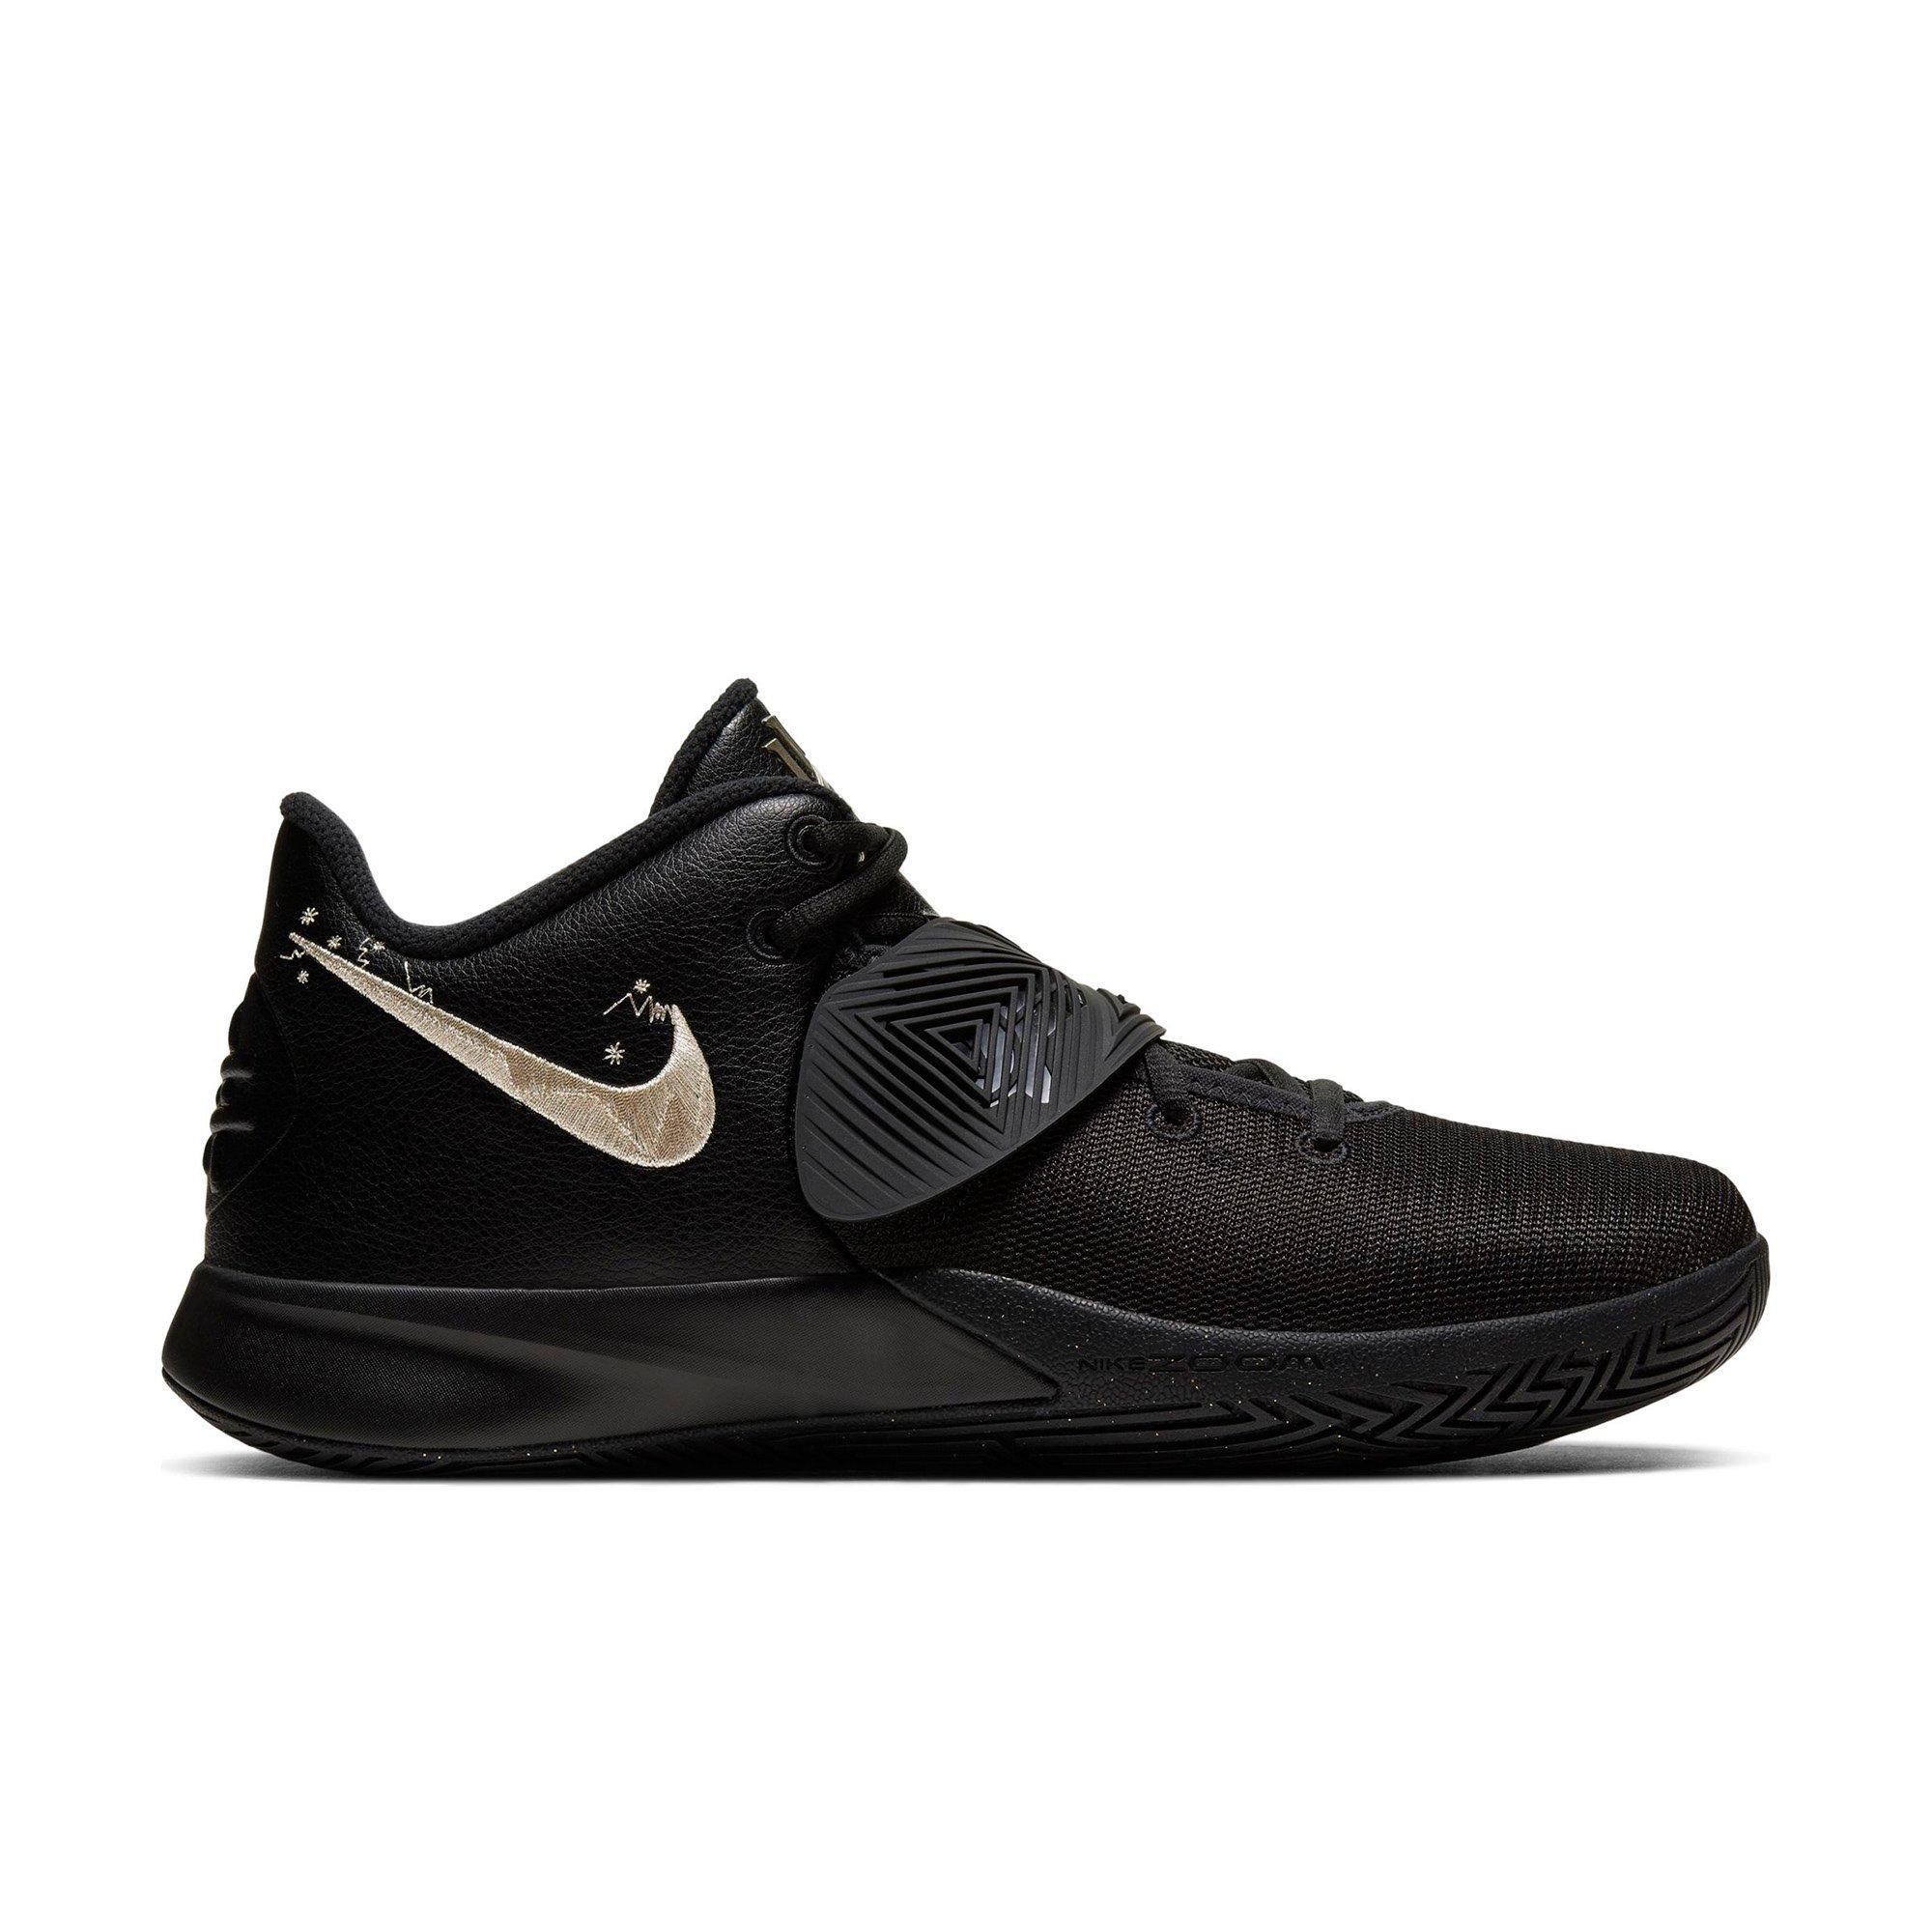 kyrie black and gold